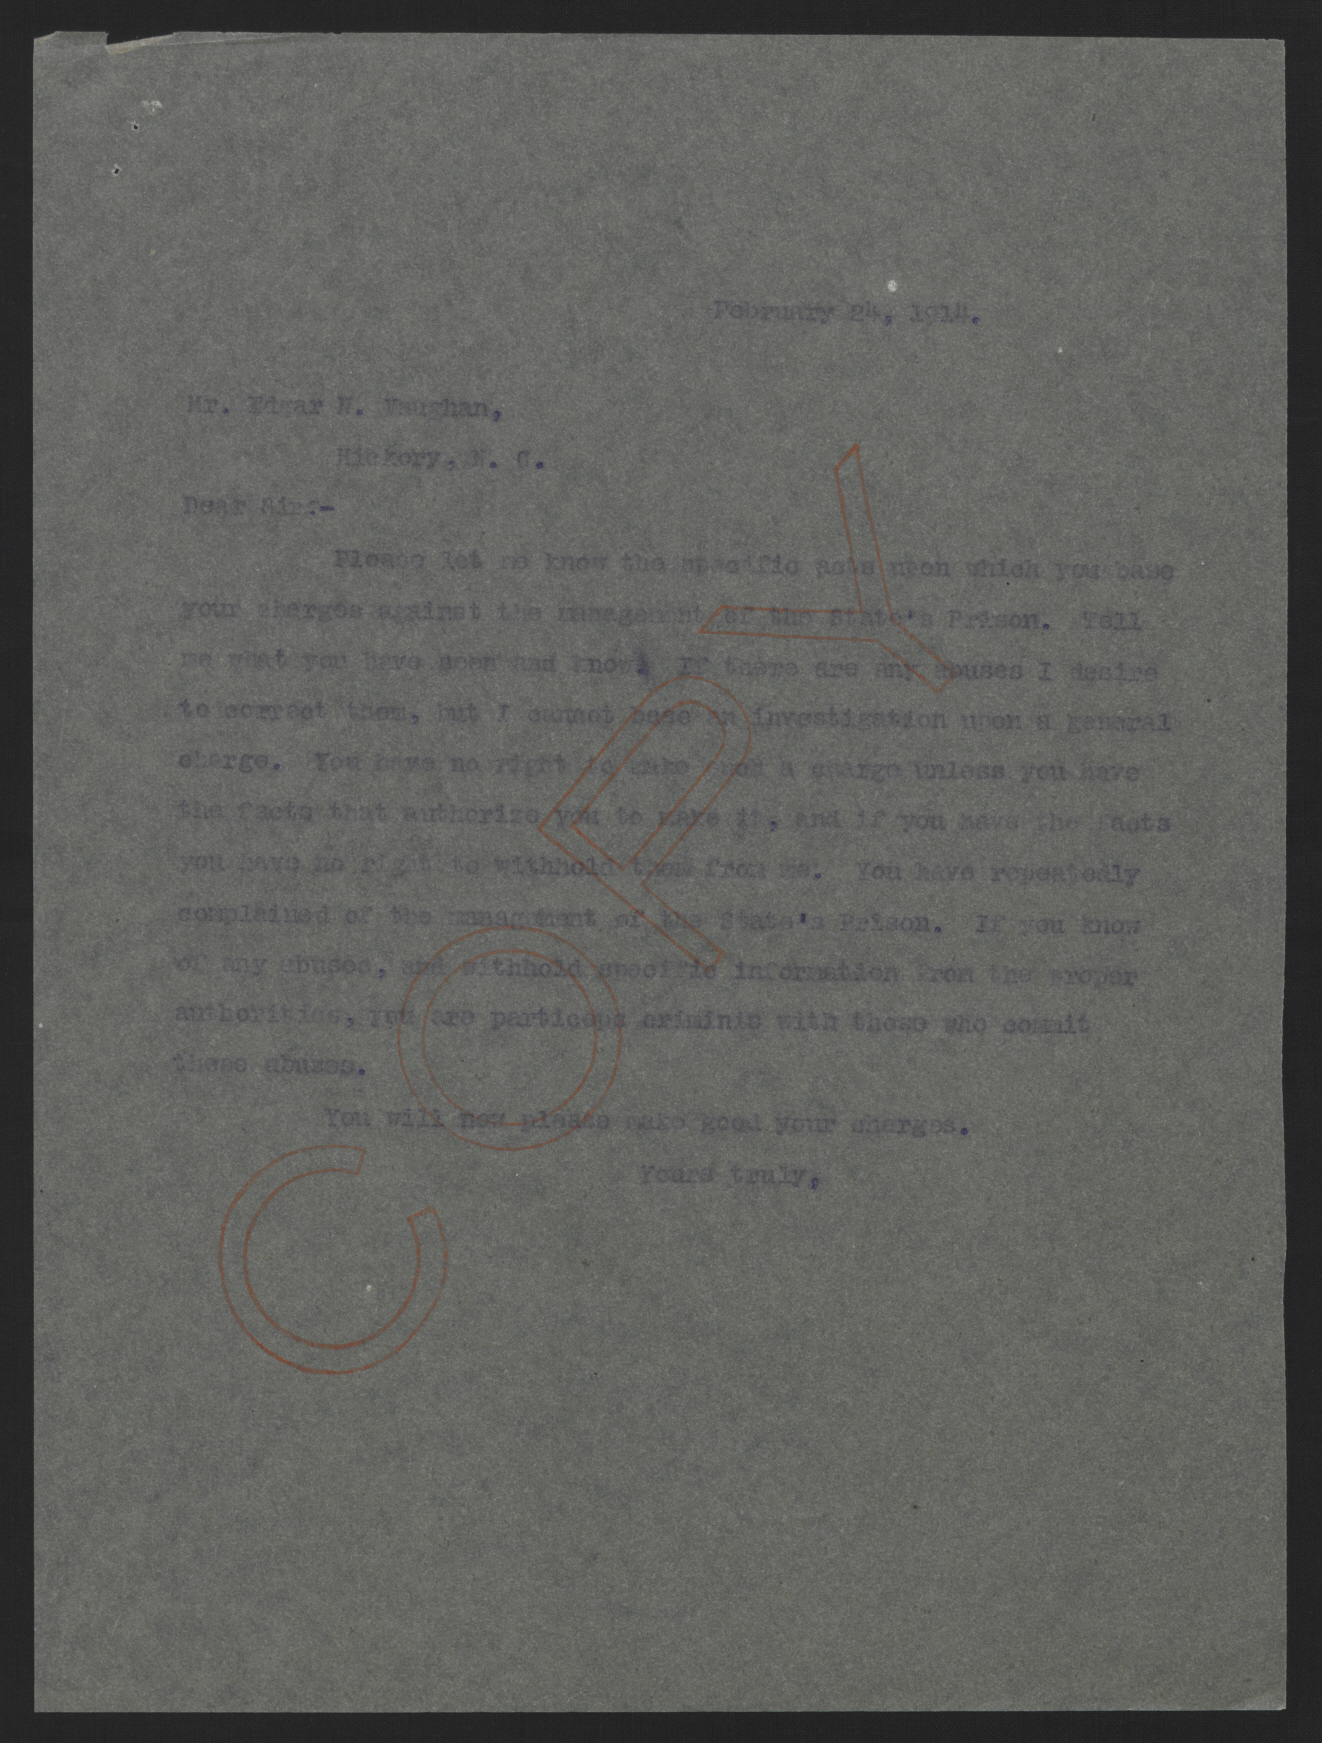 Letter from Craig to Vaughan, February 24, 1914